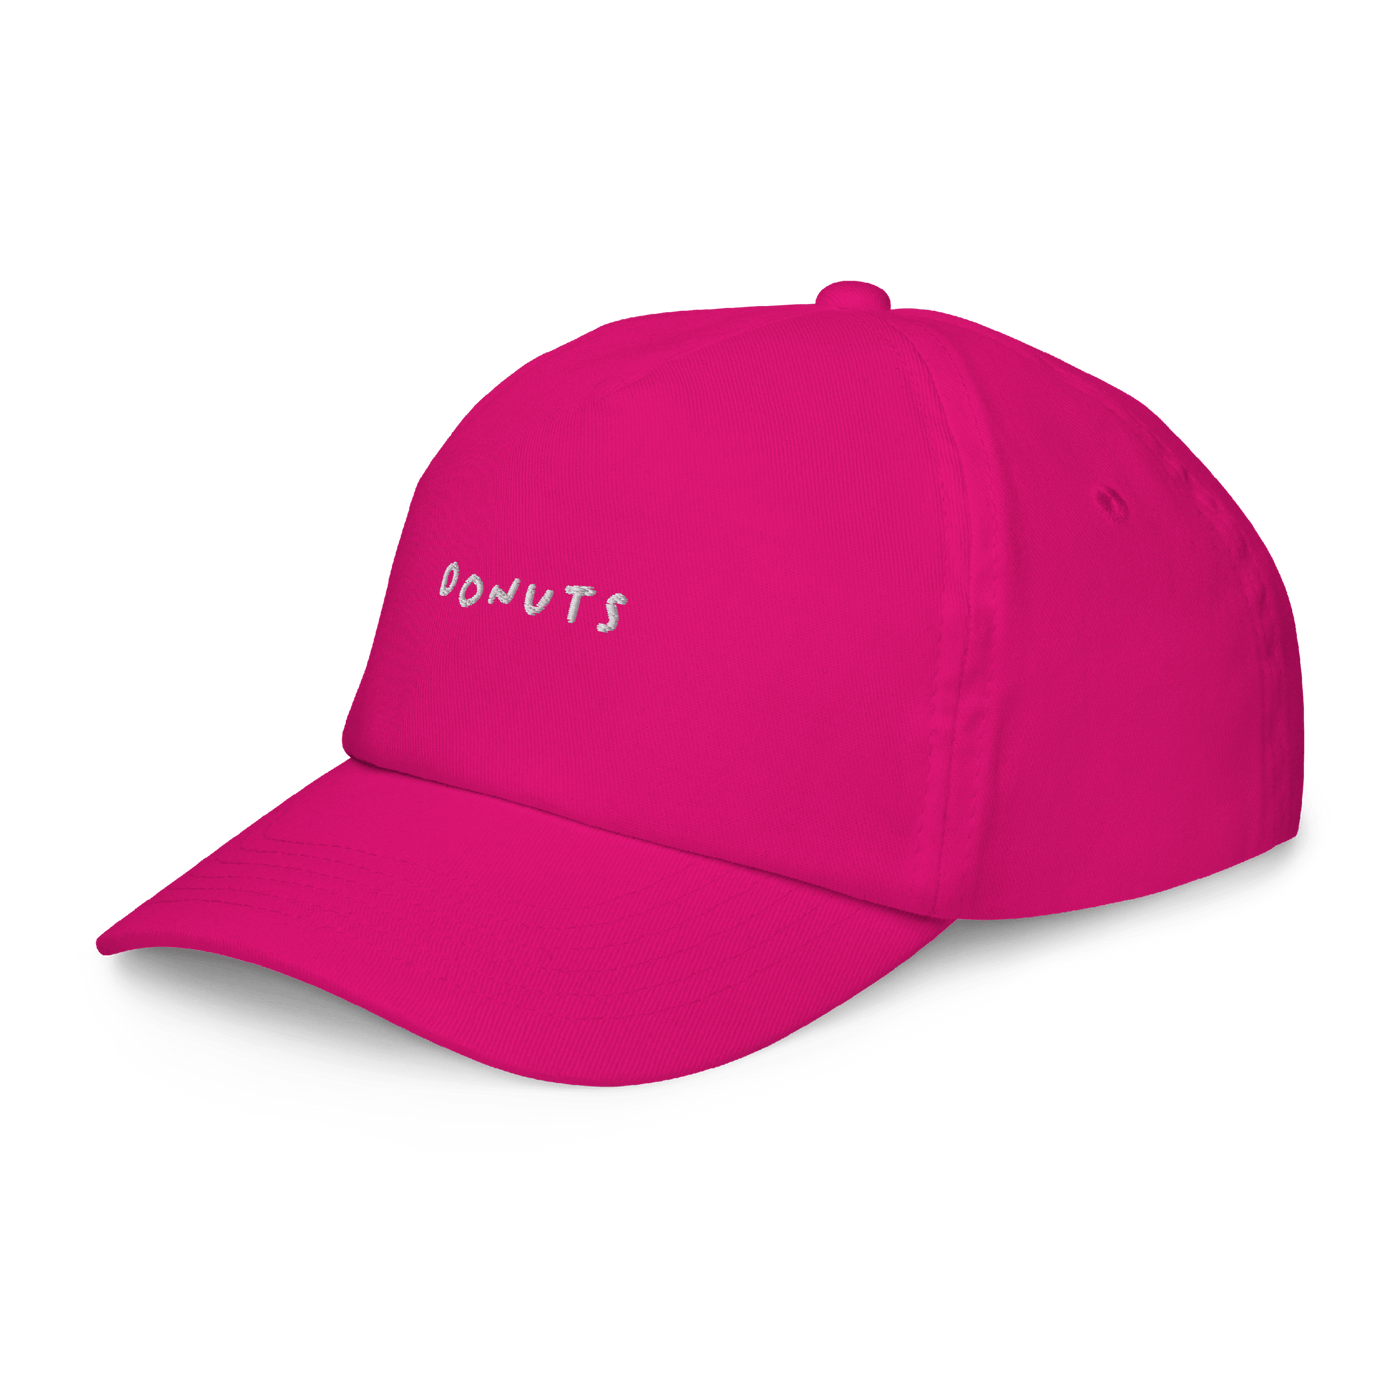 Donuts Kids cap - Fuchsia - - Just Another Cap Store